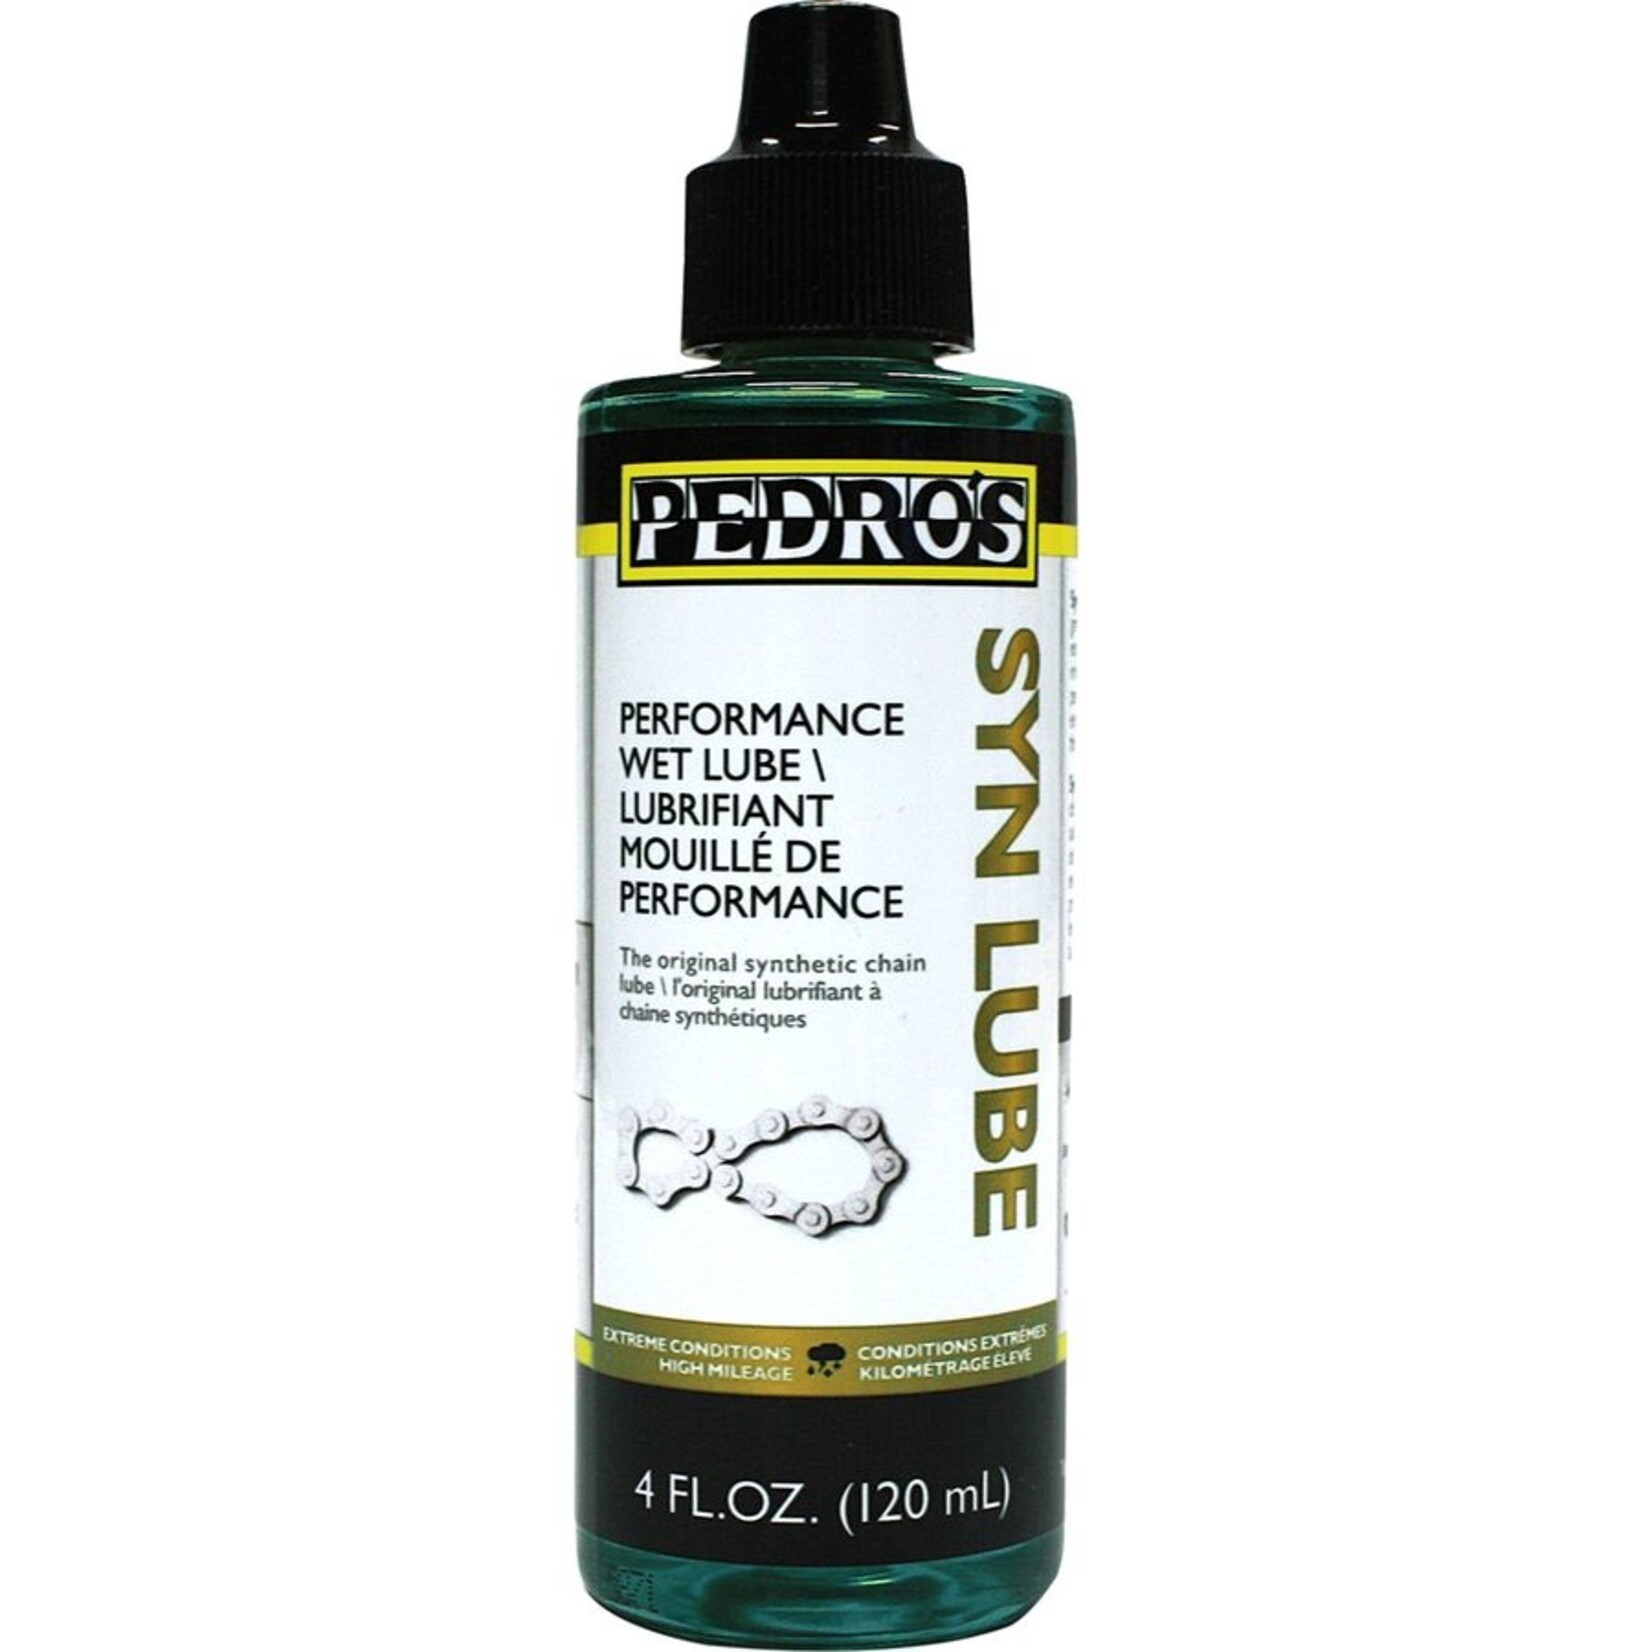 Pedro's Pedro's Syn Lube: Wet Chain Synthetic, 4oz/120ml